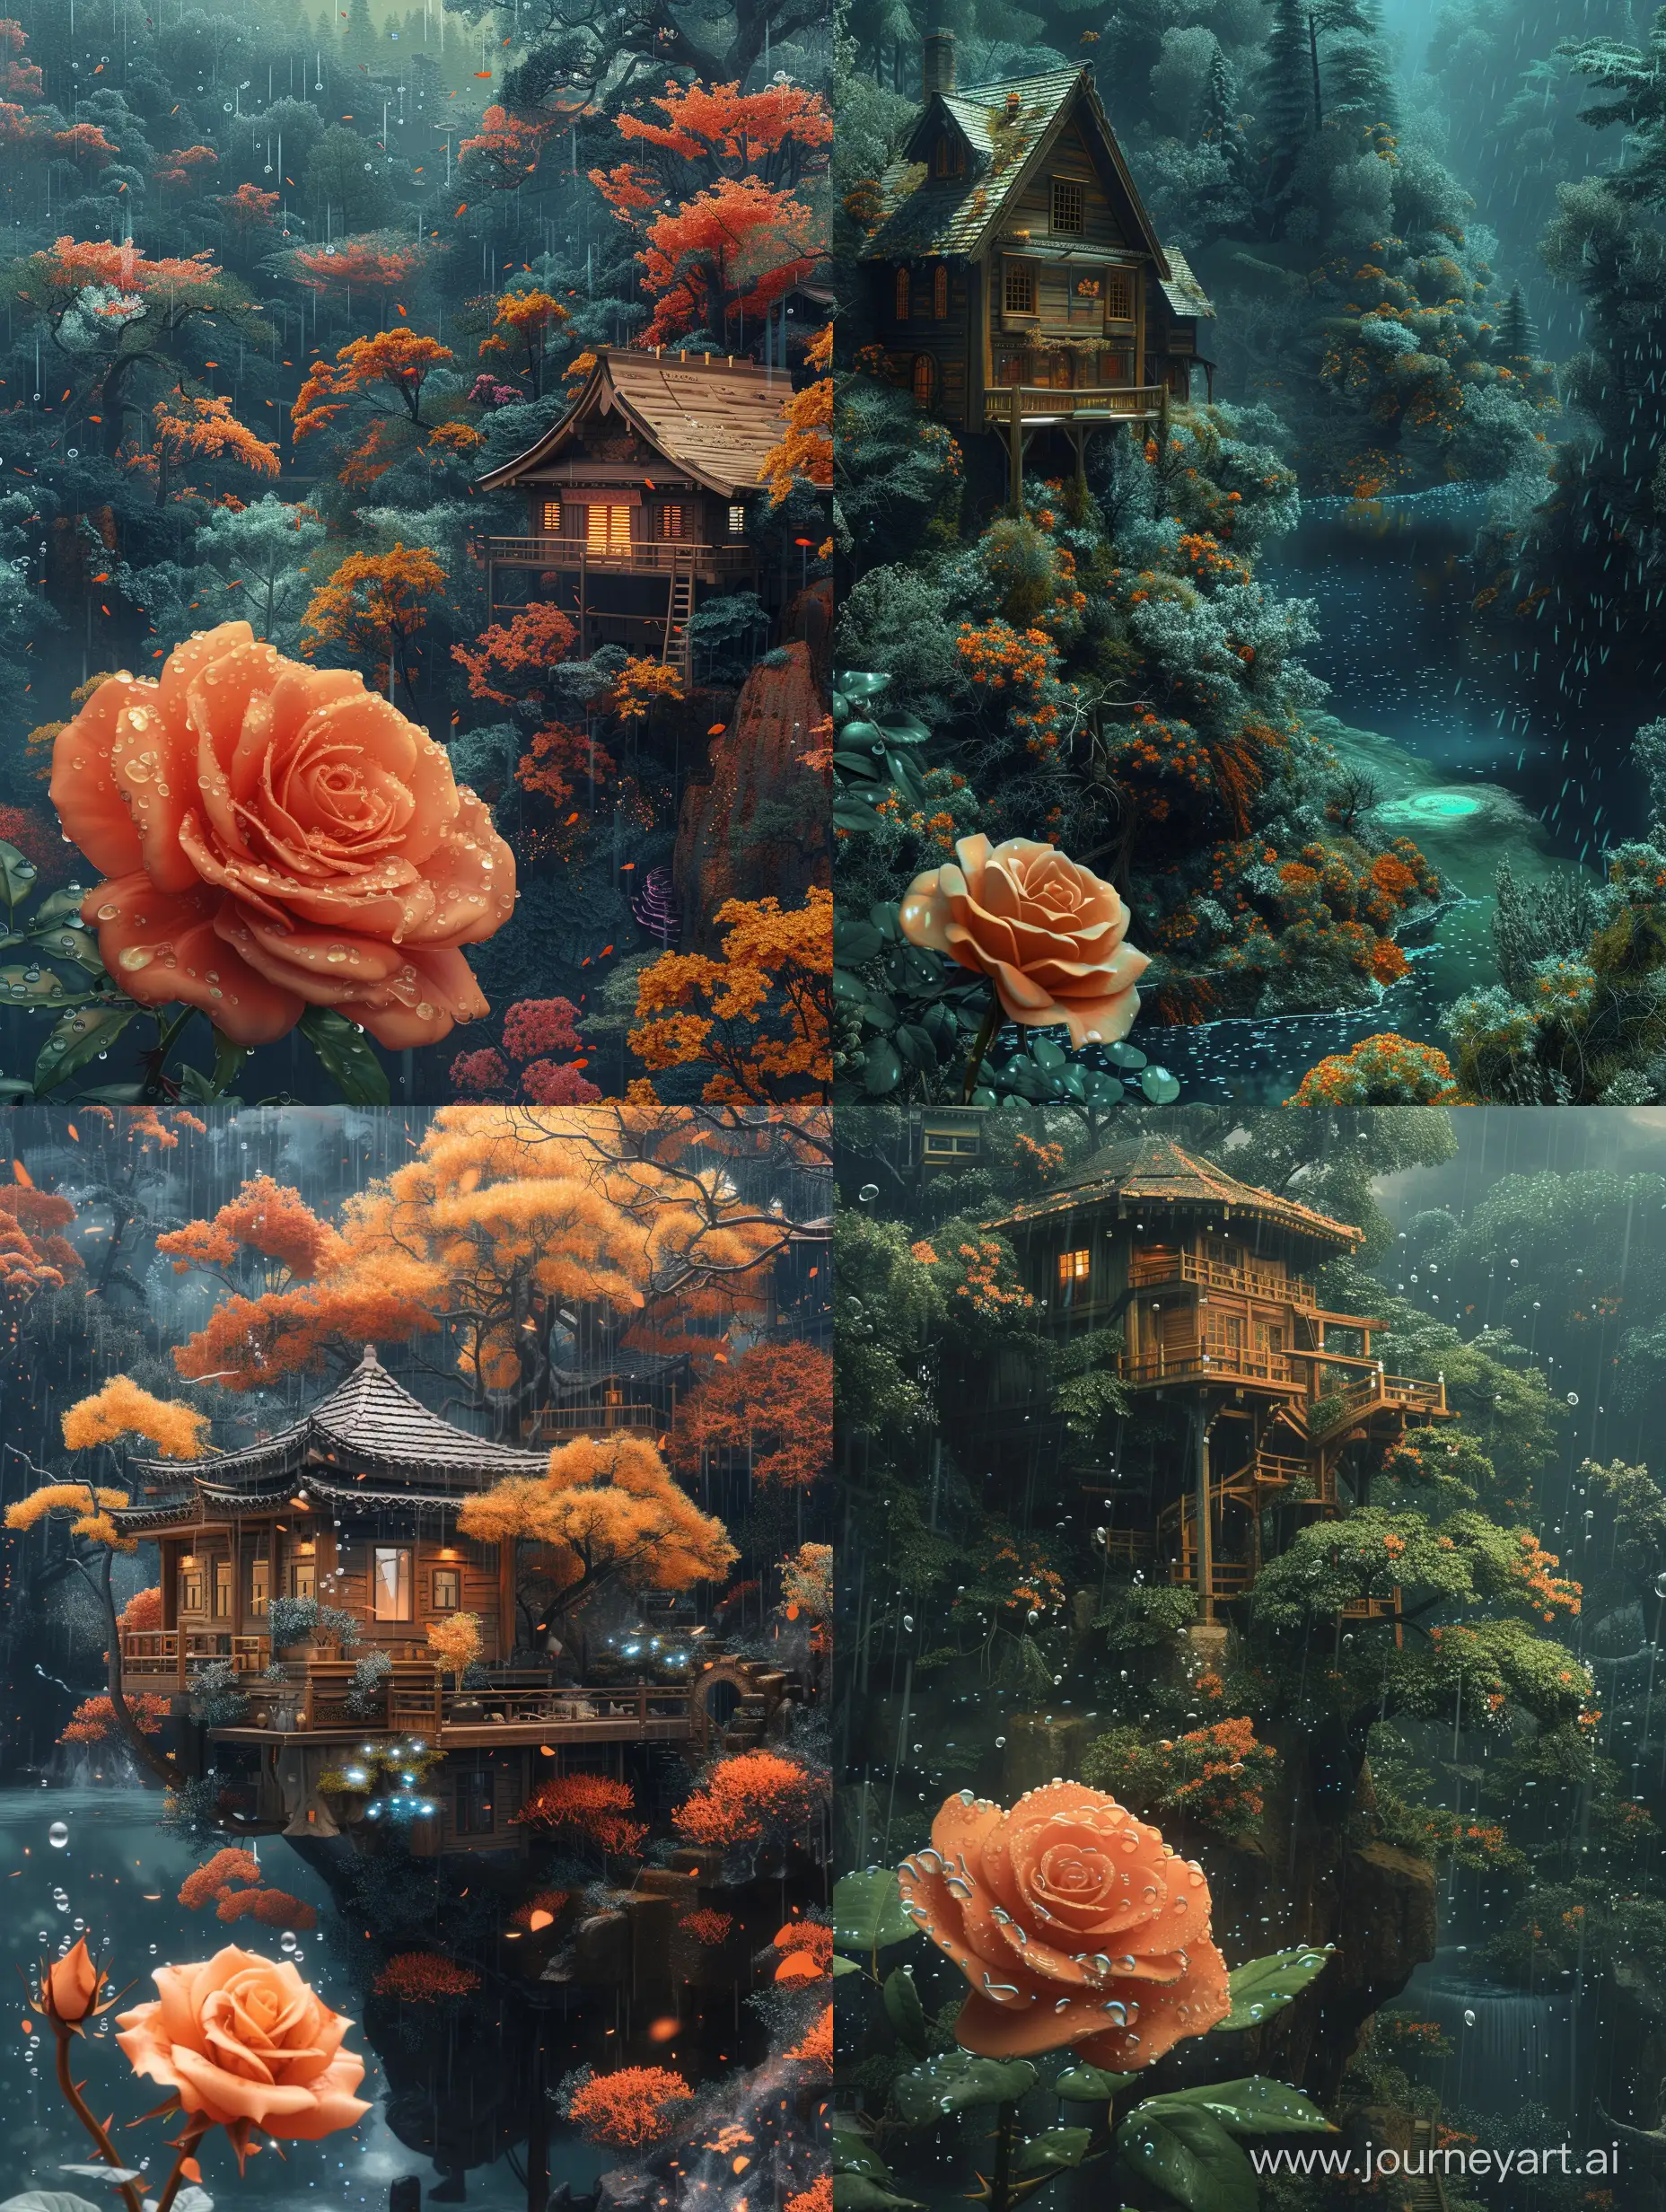 Enchanting-Bioluminescent-Wood-House-with-Rose-in-Rainfall